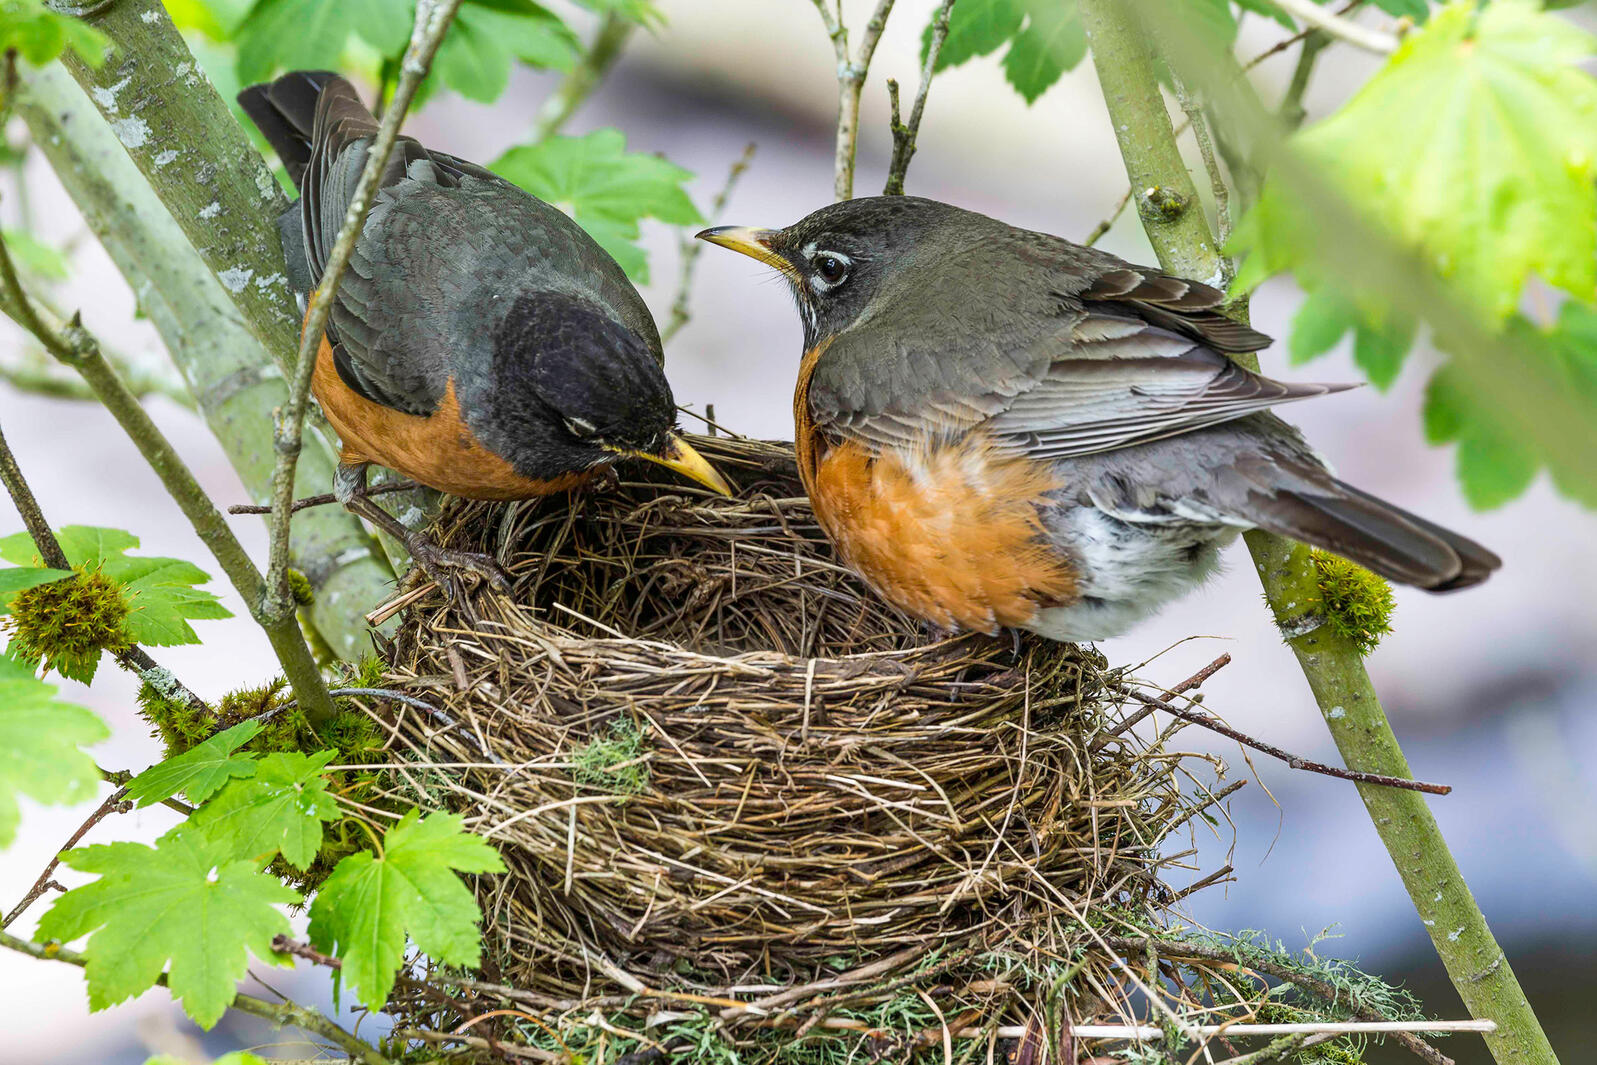 Robins at their nest